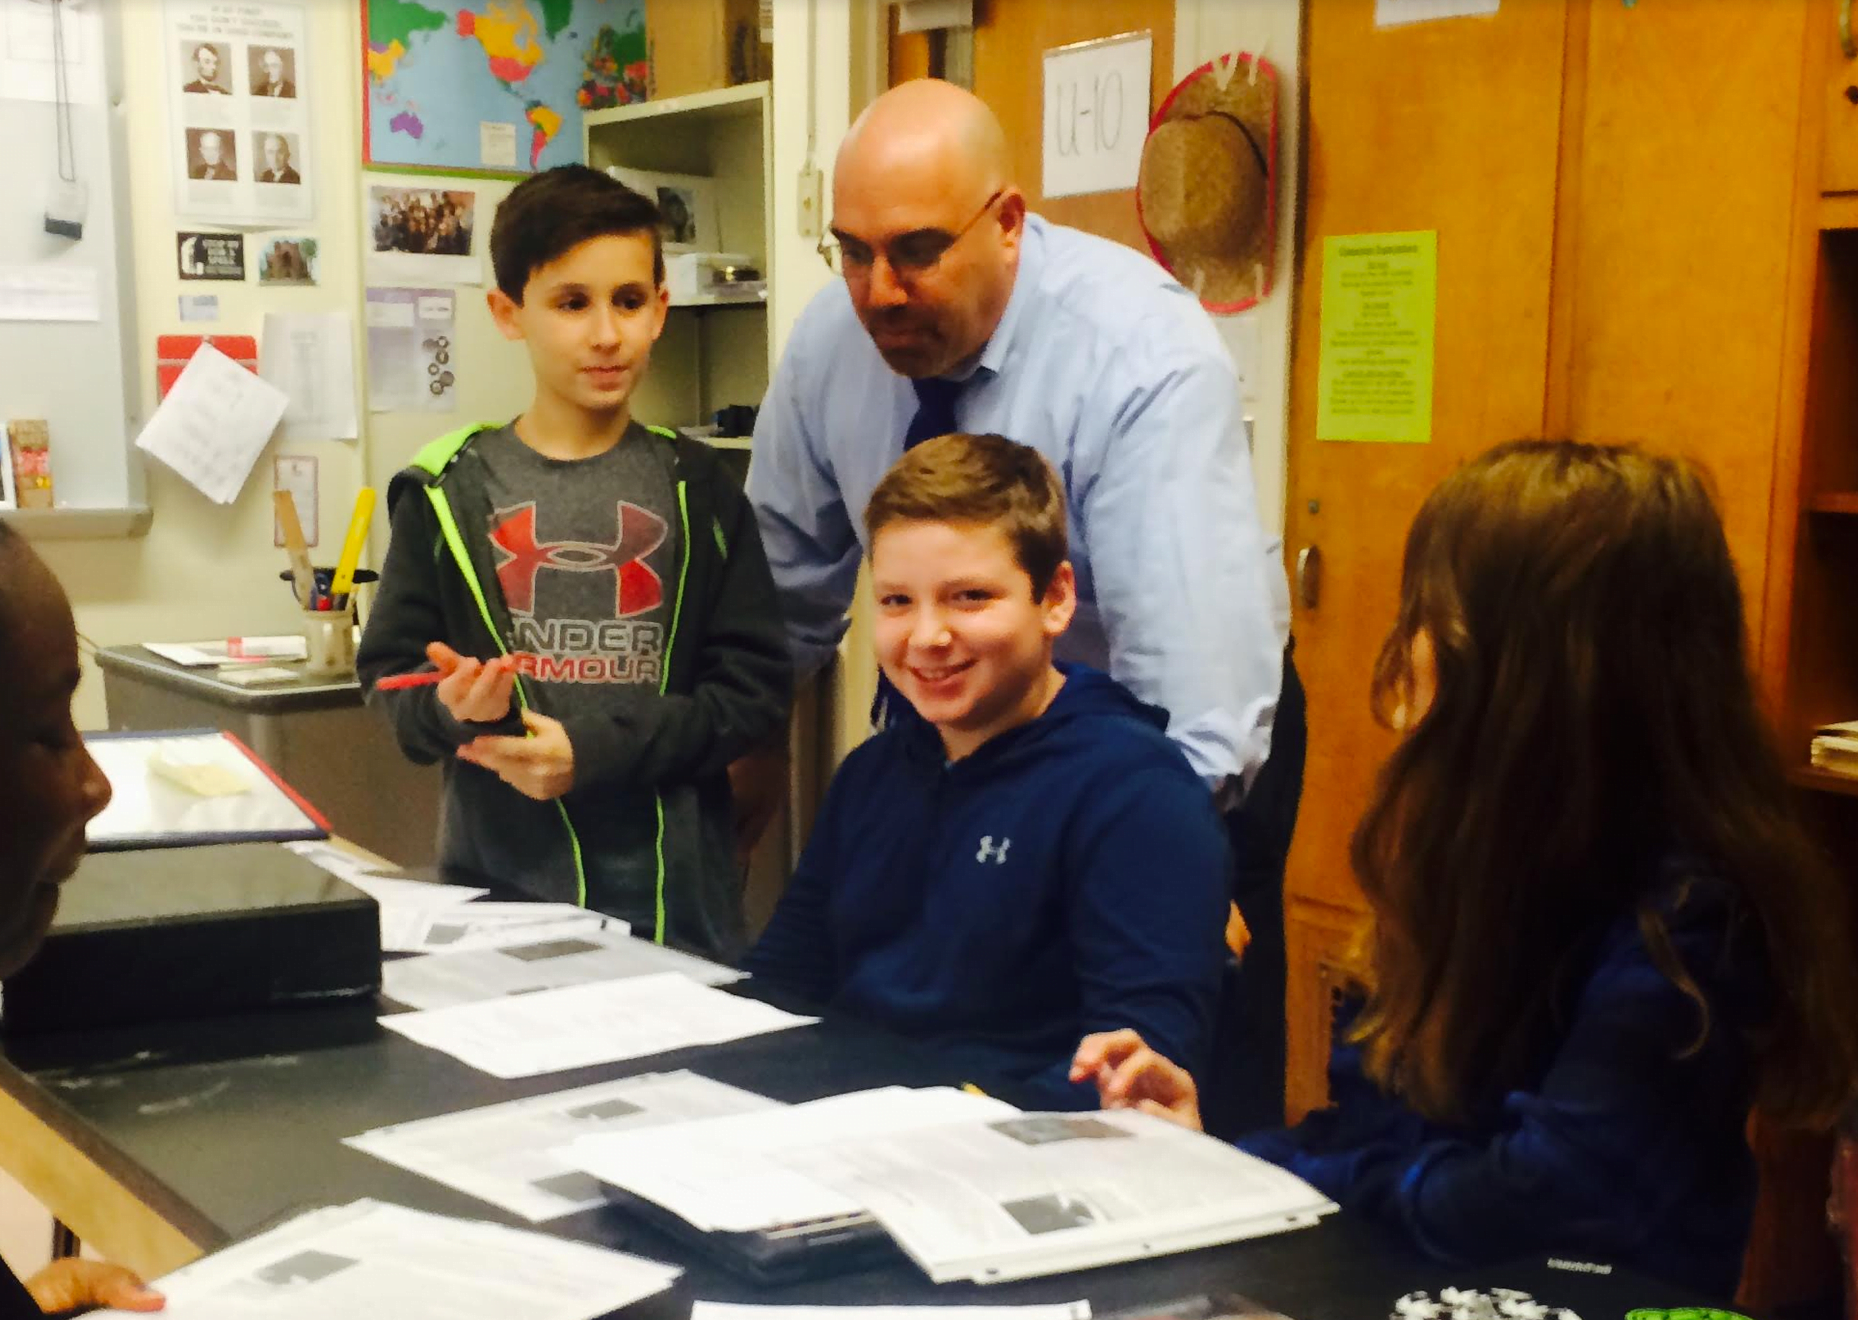 WMS principal Gordon Beinstein visited 7th graders in class on Wednesday, Dec 6, 2017 Photo: Leslie Yager